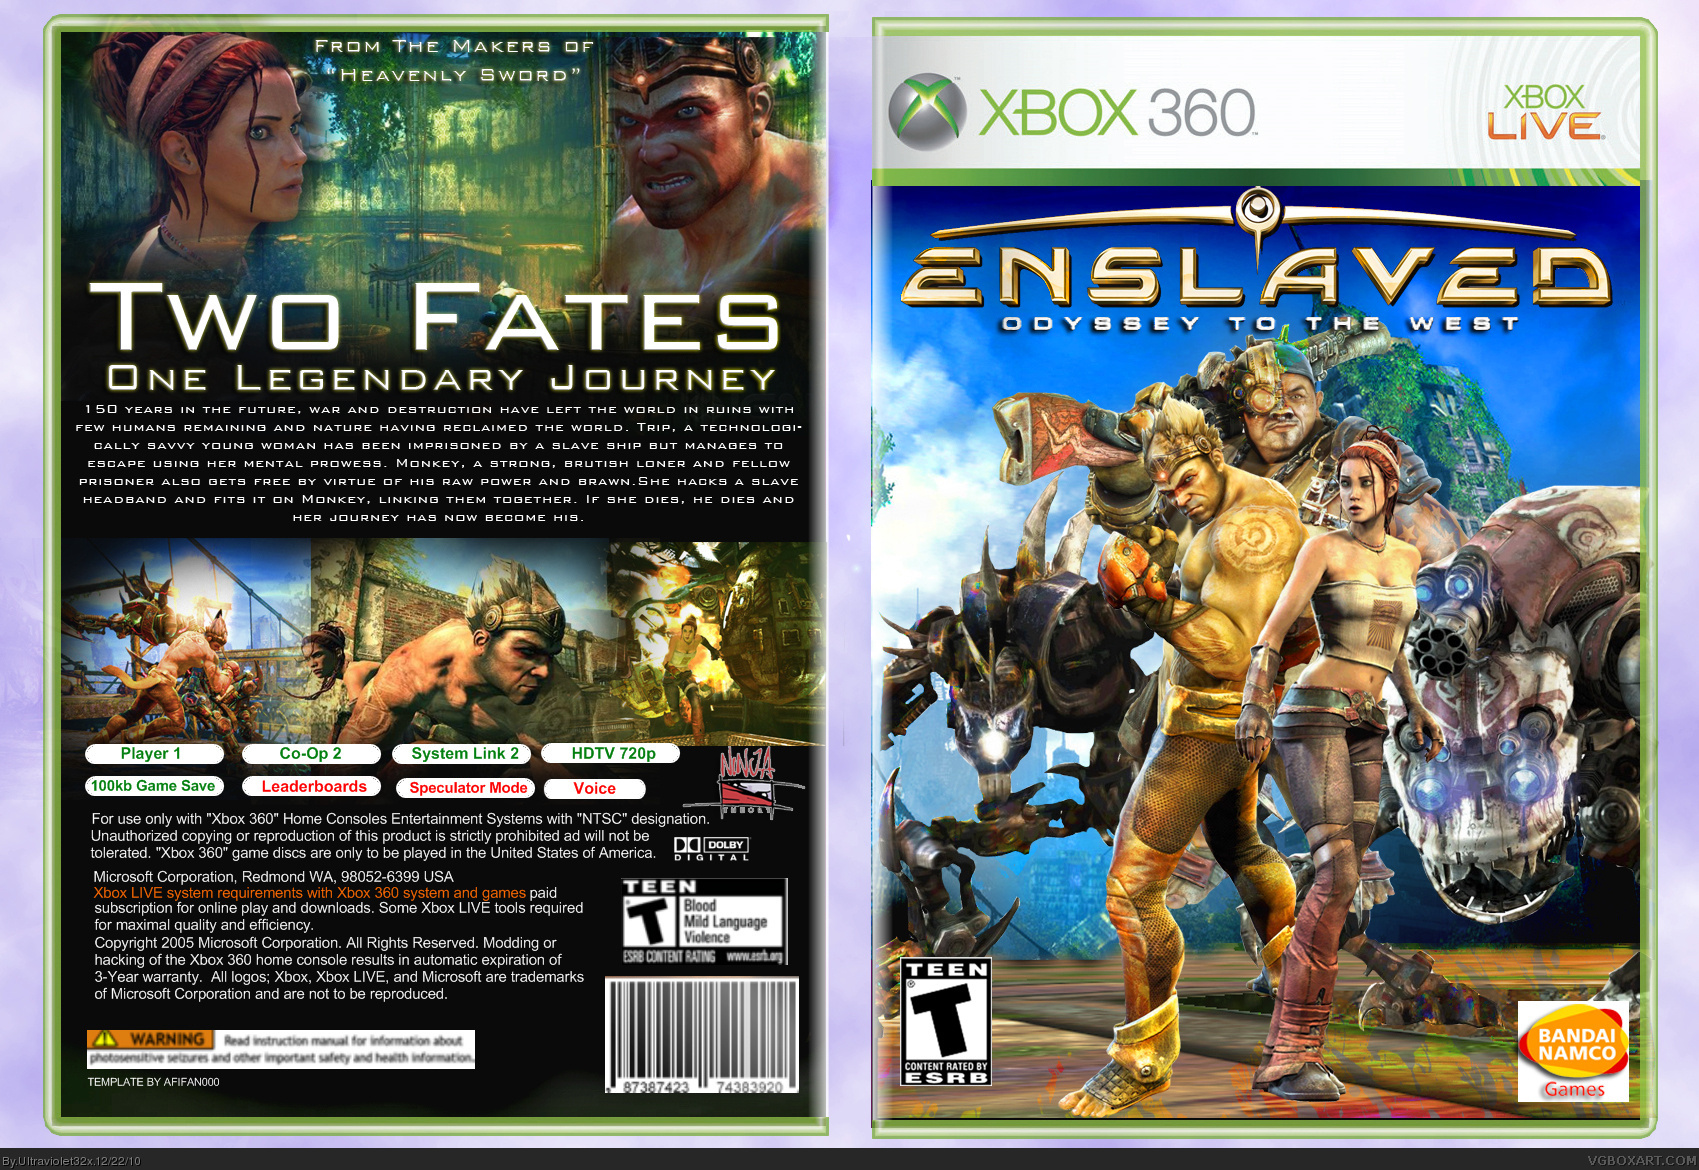 enslaved odyssey to the west premium edition download